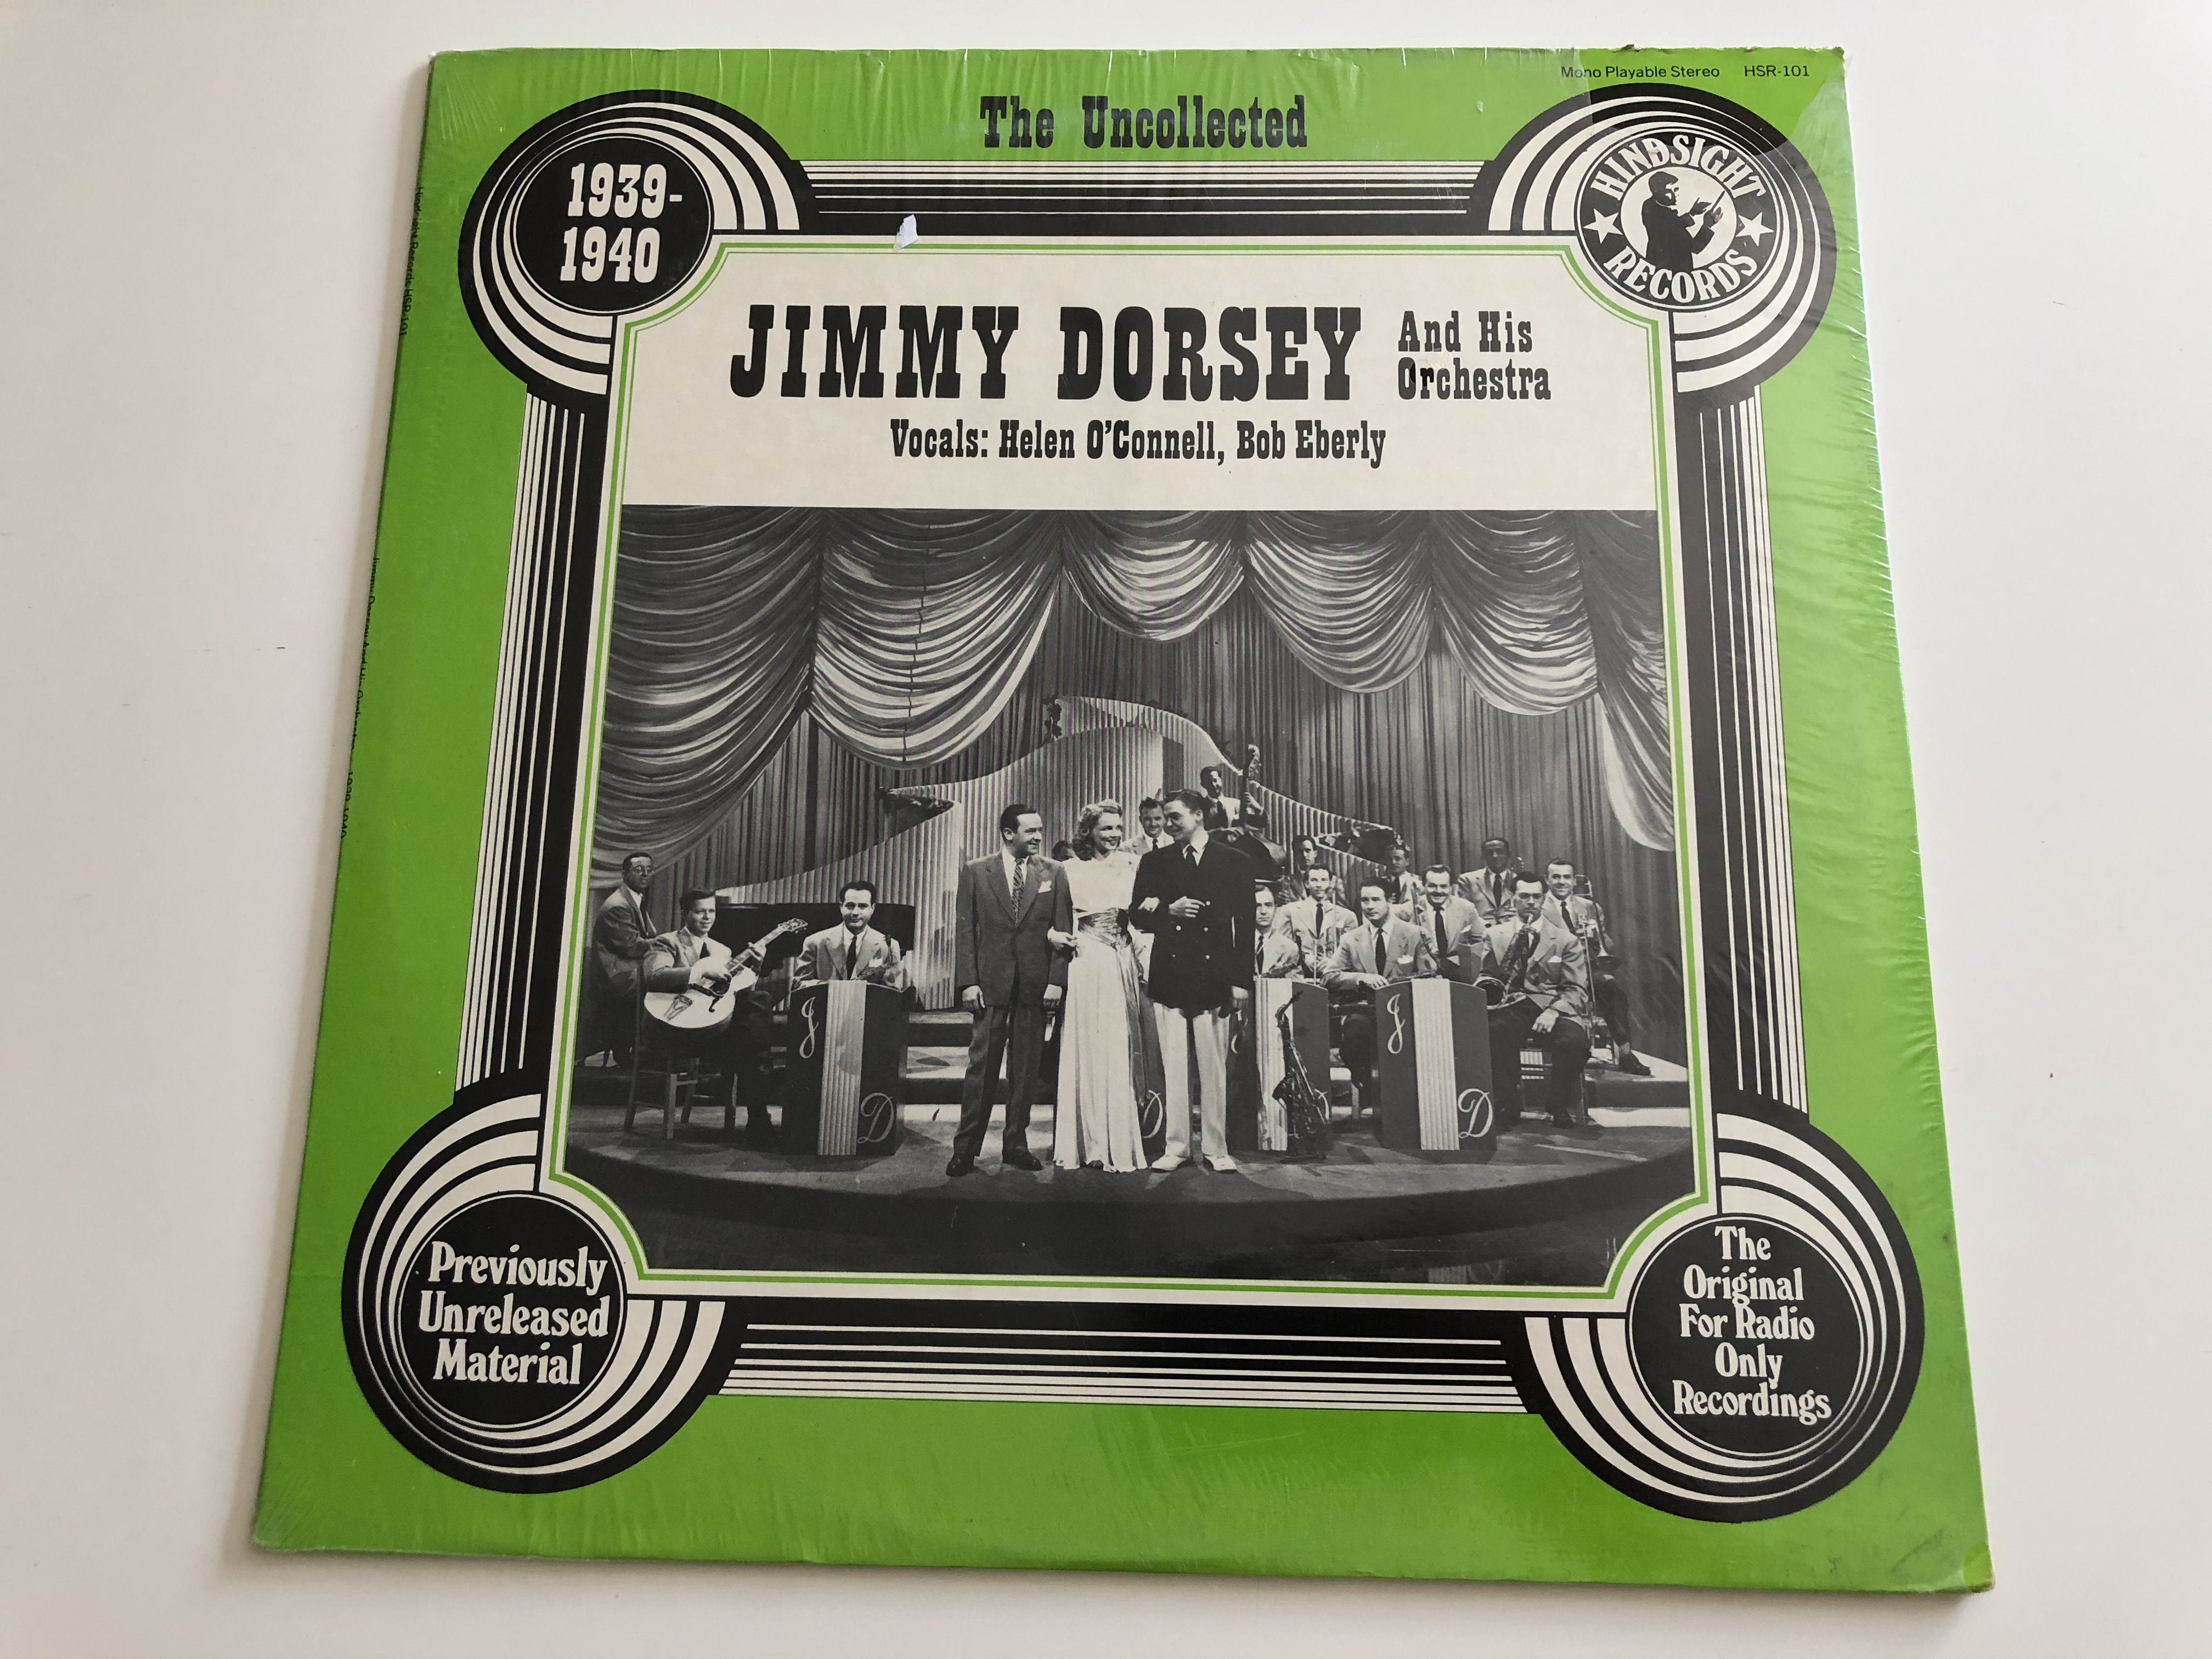 jimmy-dorsey-and-his-orchestra-1939-1940-vocals-helen-o-connell-bob-eberly-the-original-for-radio-only-recordings-hindsight-records-lp-stereo-mono-hsr-101-1-.jpg